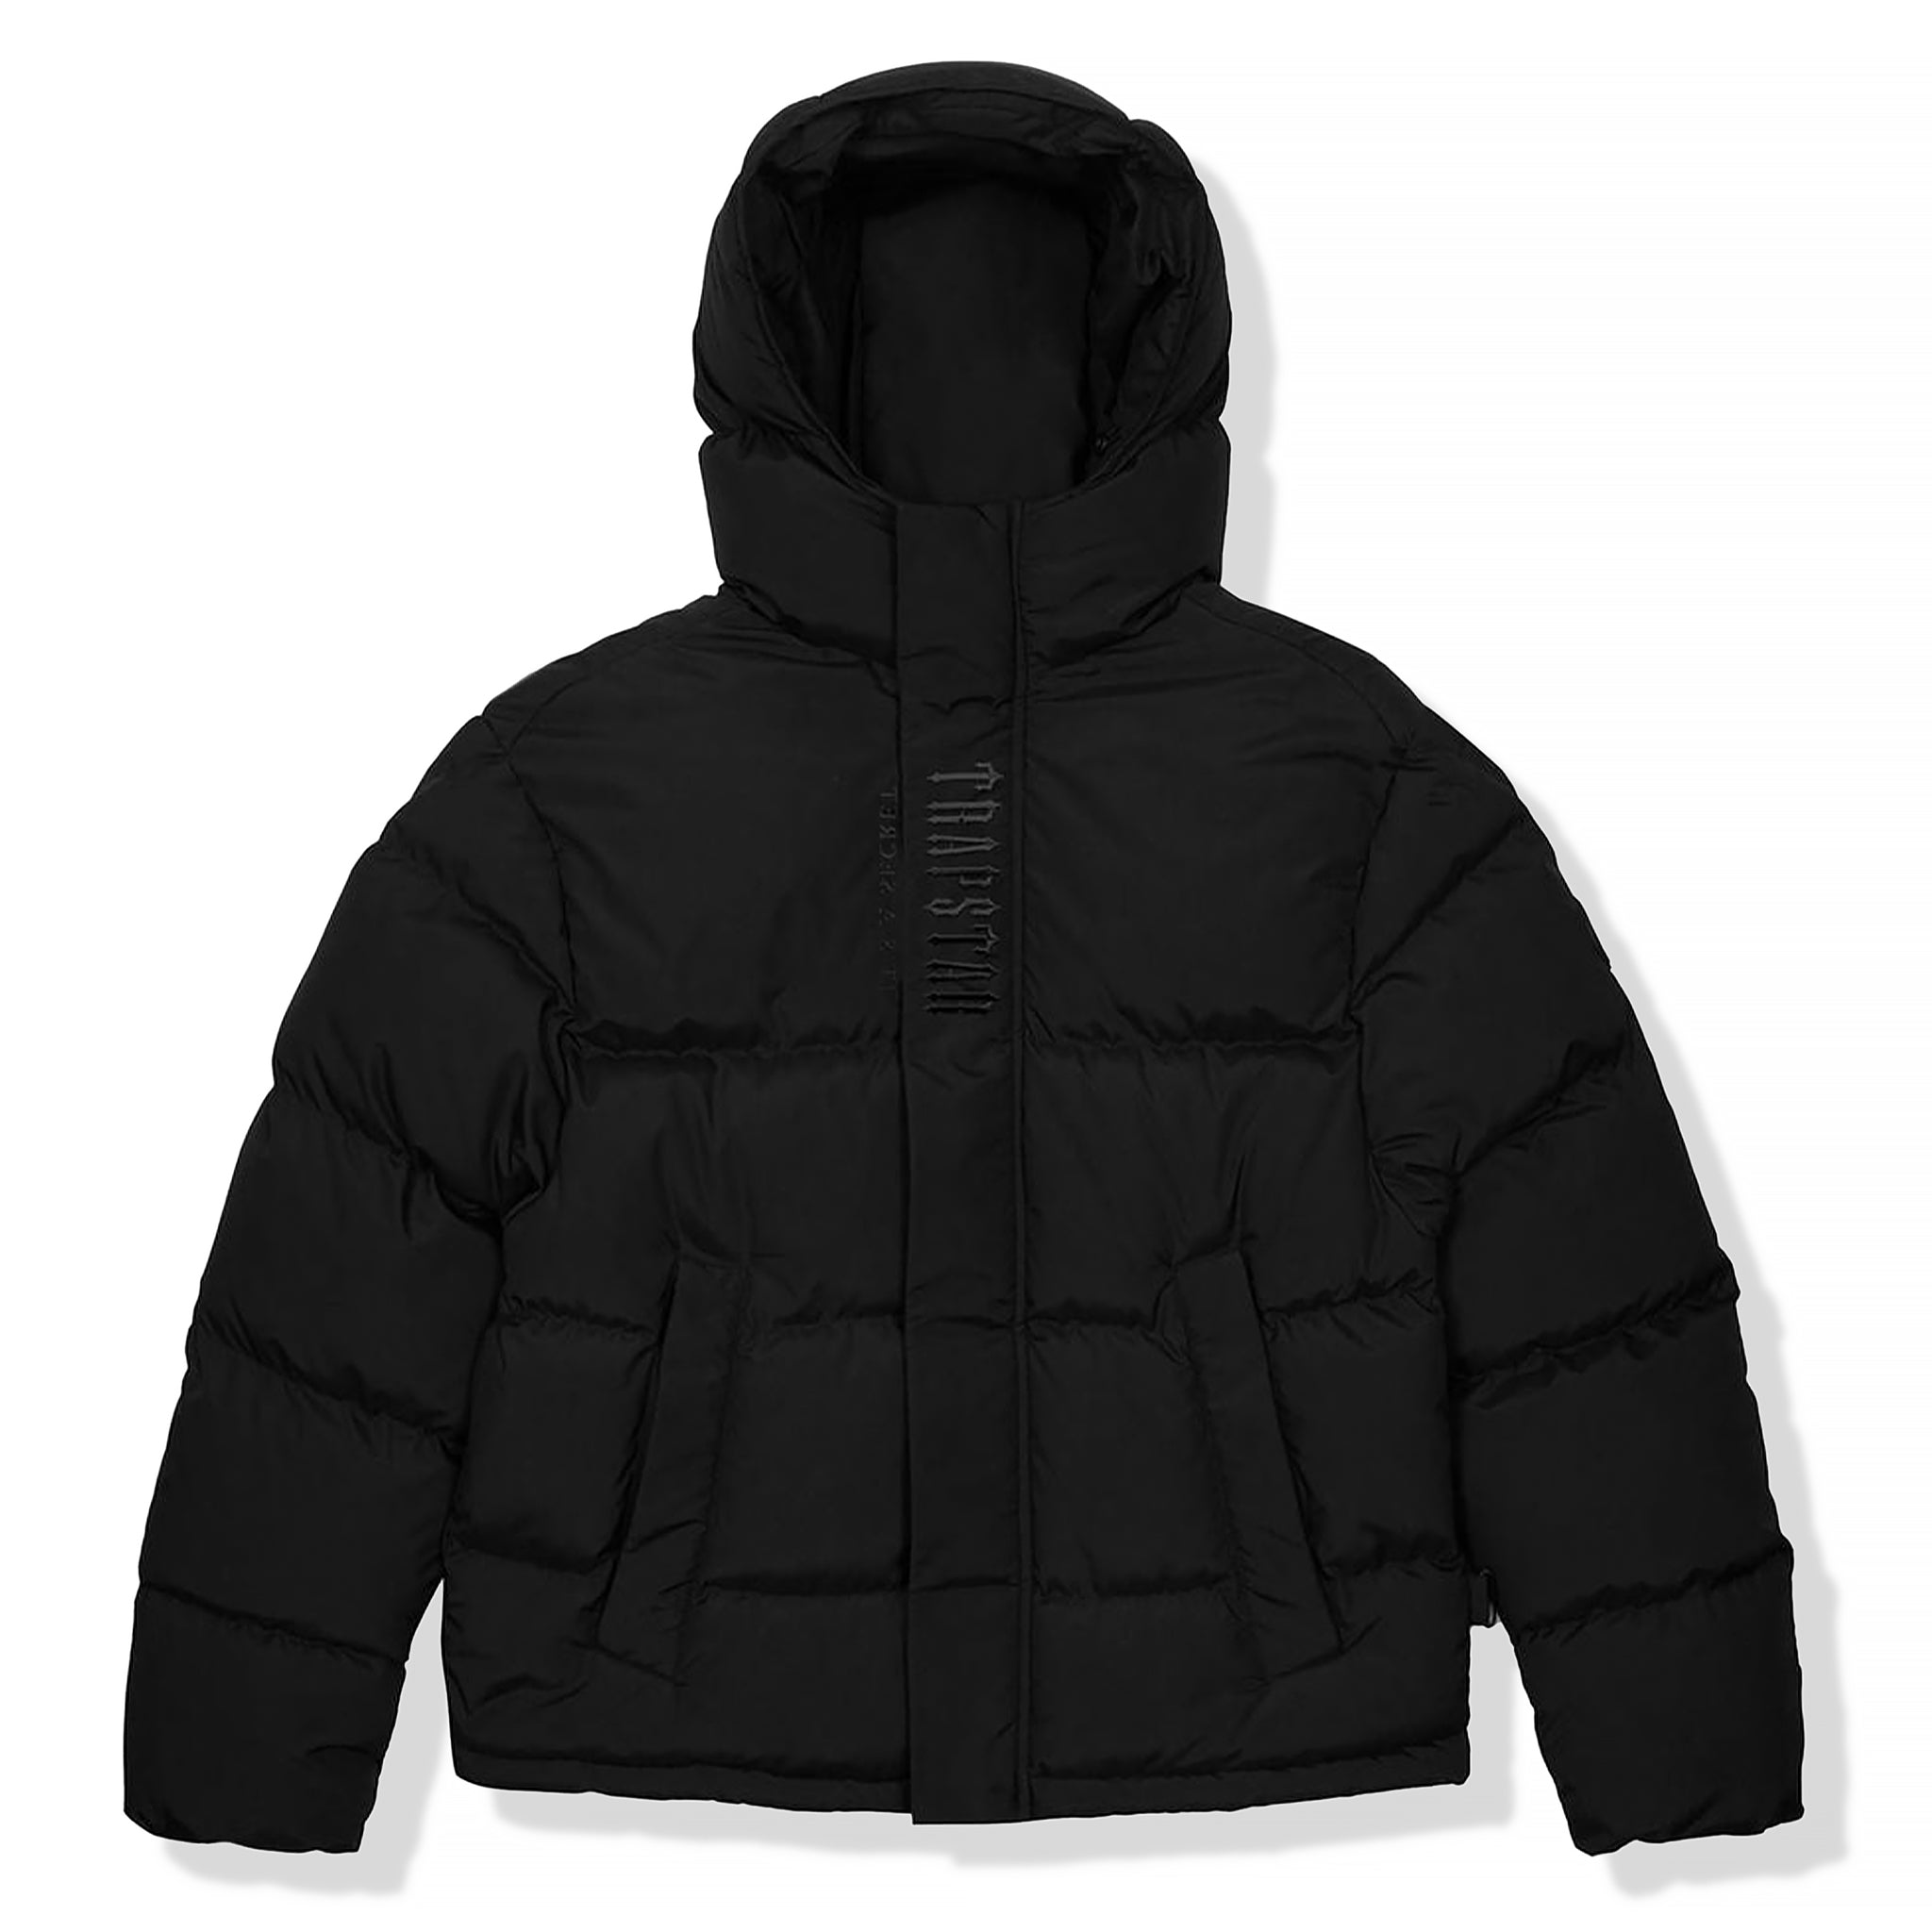 Trapstar Decoded 2.0 Blackout Edition Hooded Puffer Jacket